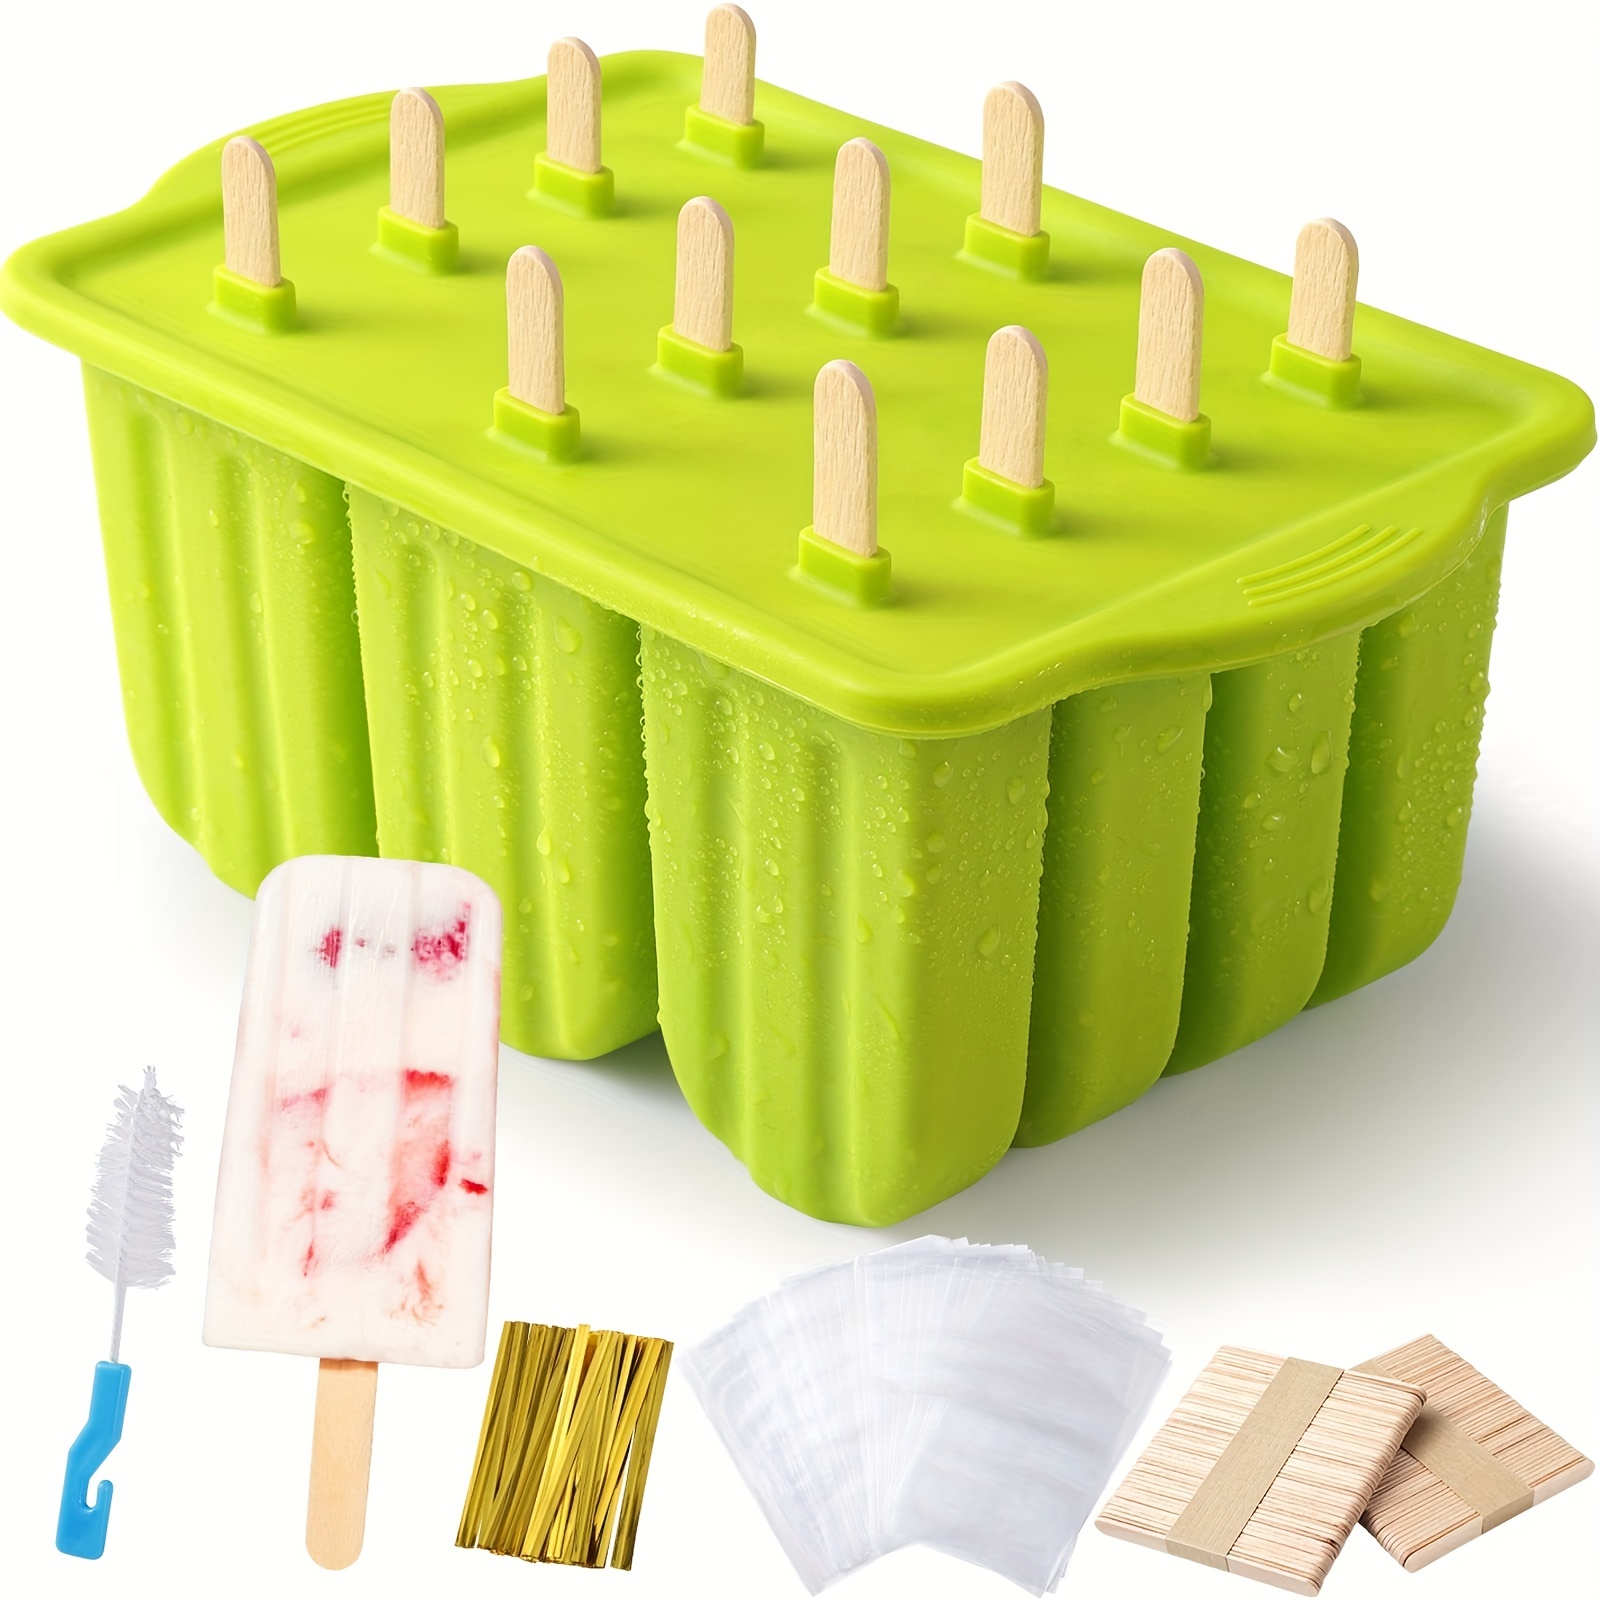 Popsicle Molds for Toddlers Kids, 9-Cavity Popsicles Molds Silicone BPA  Free Popsicle Maker Mold Set Ice Pop Mold Ice Popsicle Maker Handmade